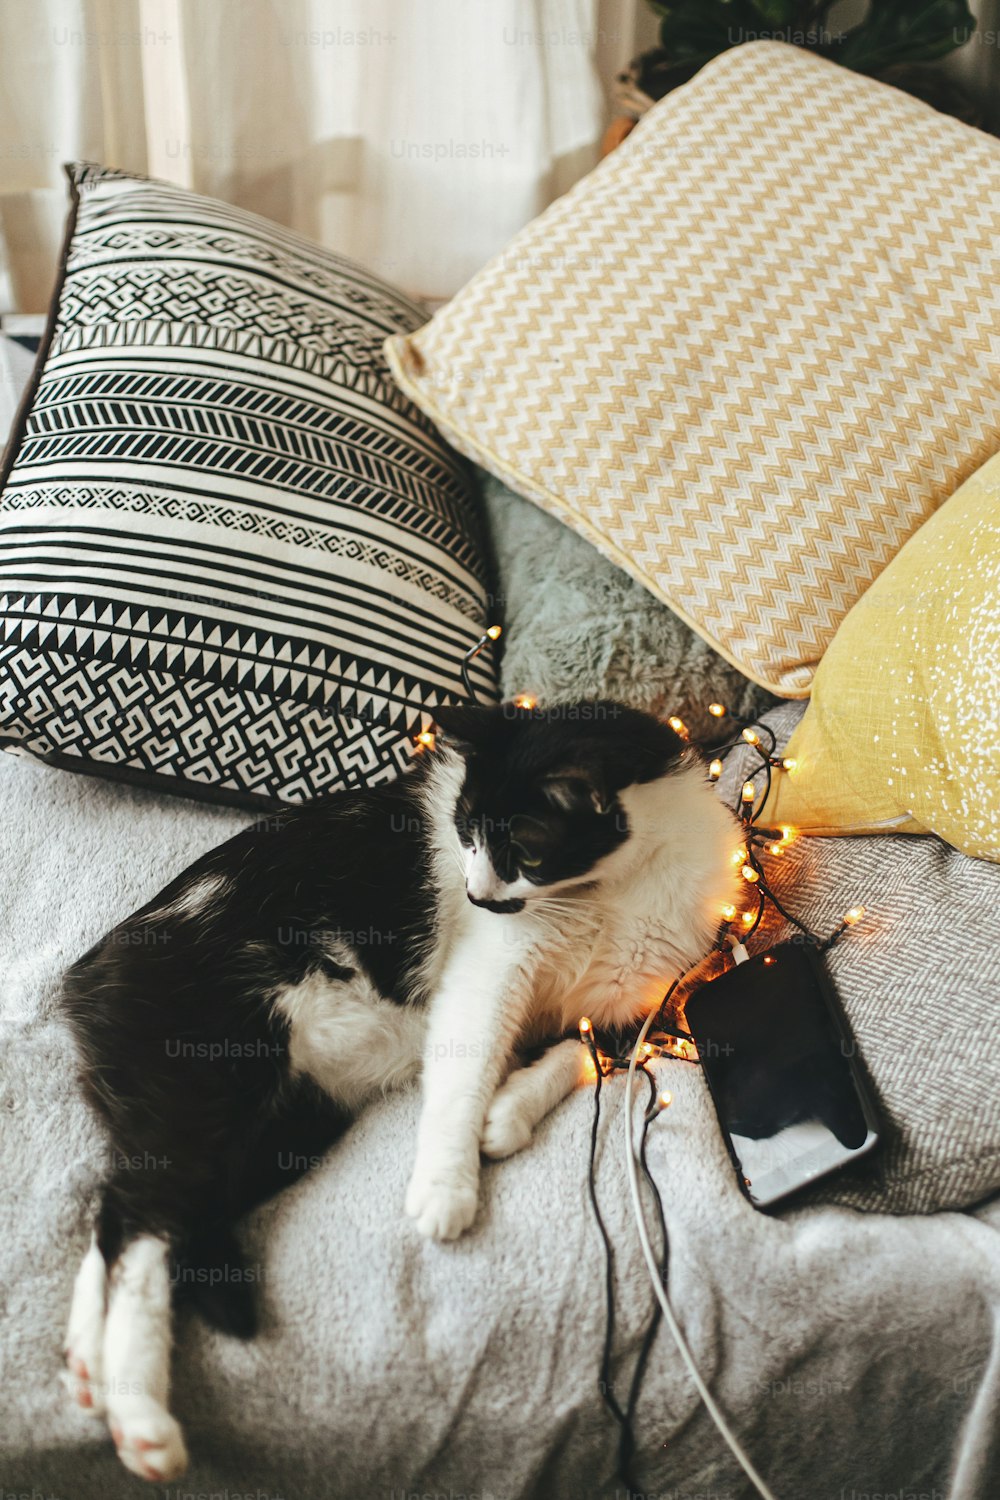 Cute cat lying on soft bed with charging phone and pillows in warm christmas lights. Adorable black and white curious cat relaxing on cozy blanket in festive room, happy holidays